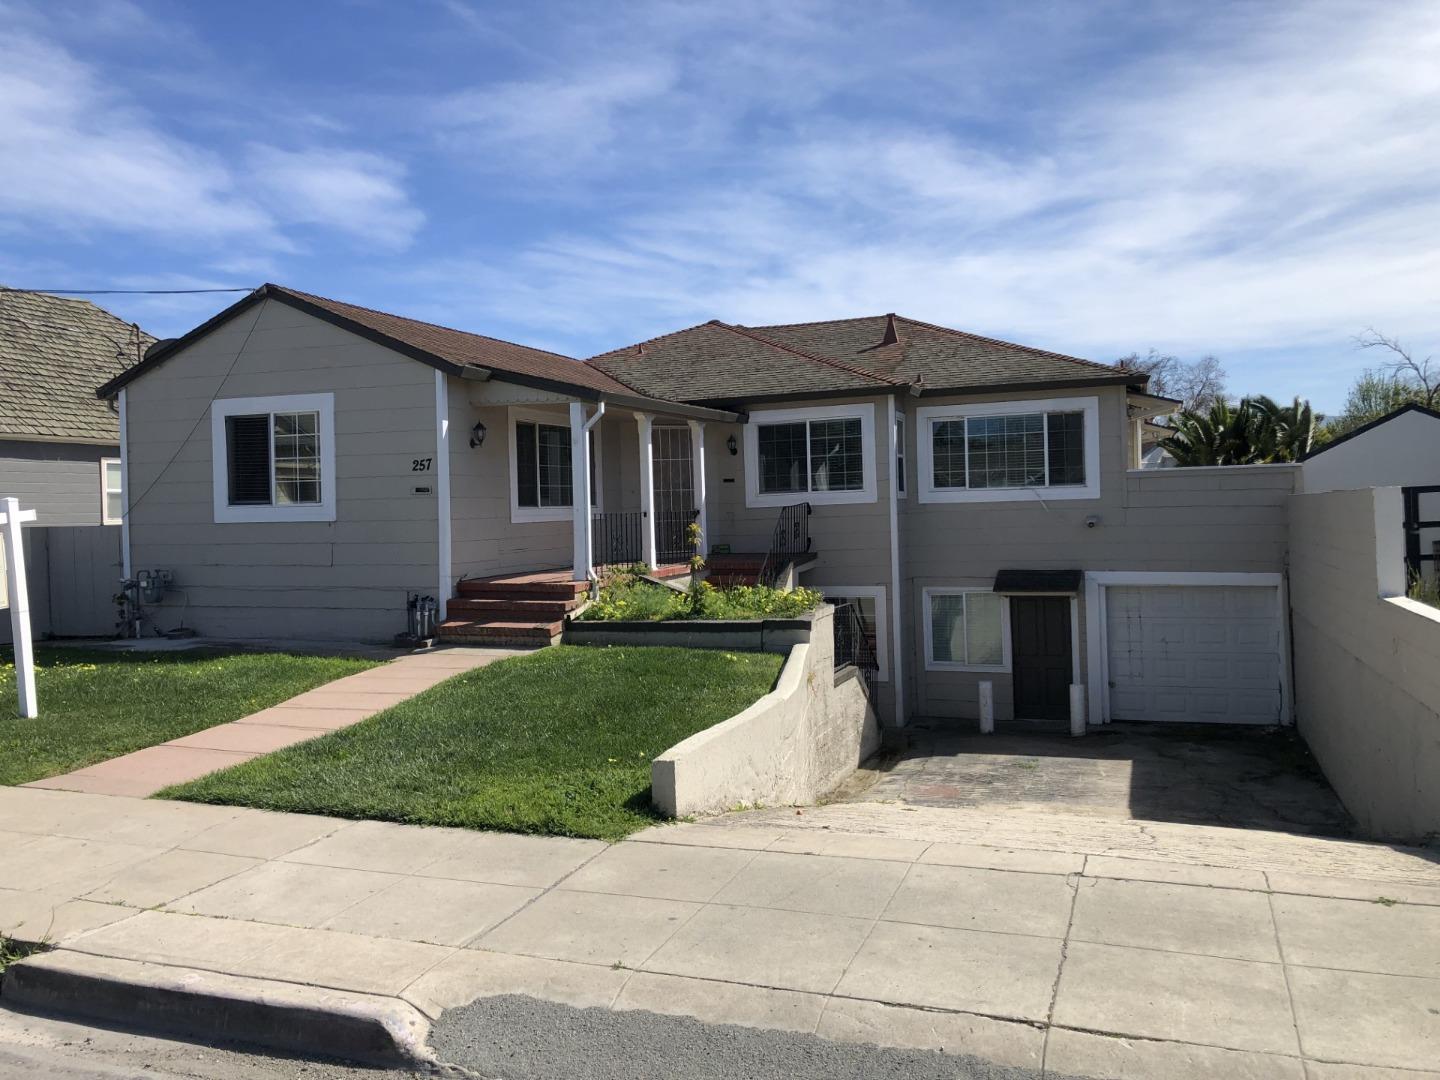 Photo of 257 Clay St in Salinas, CA